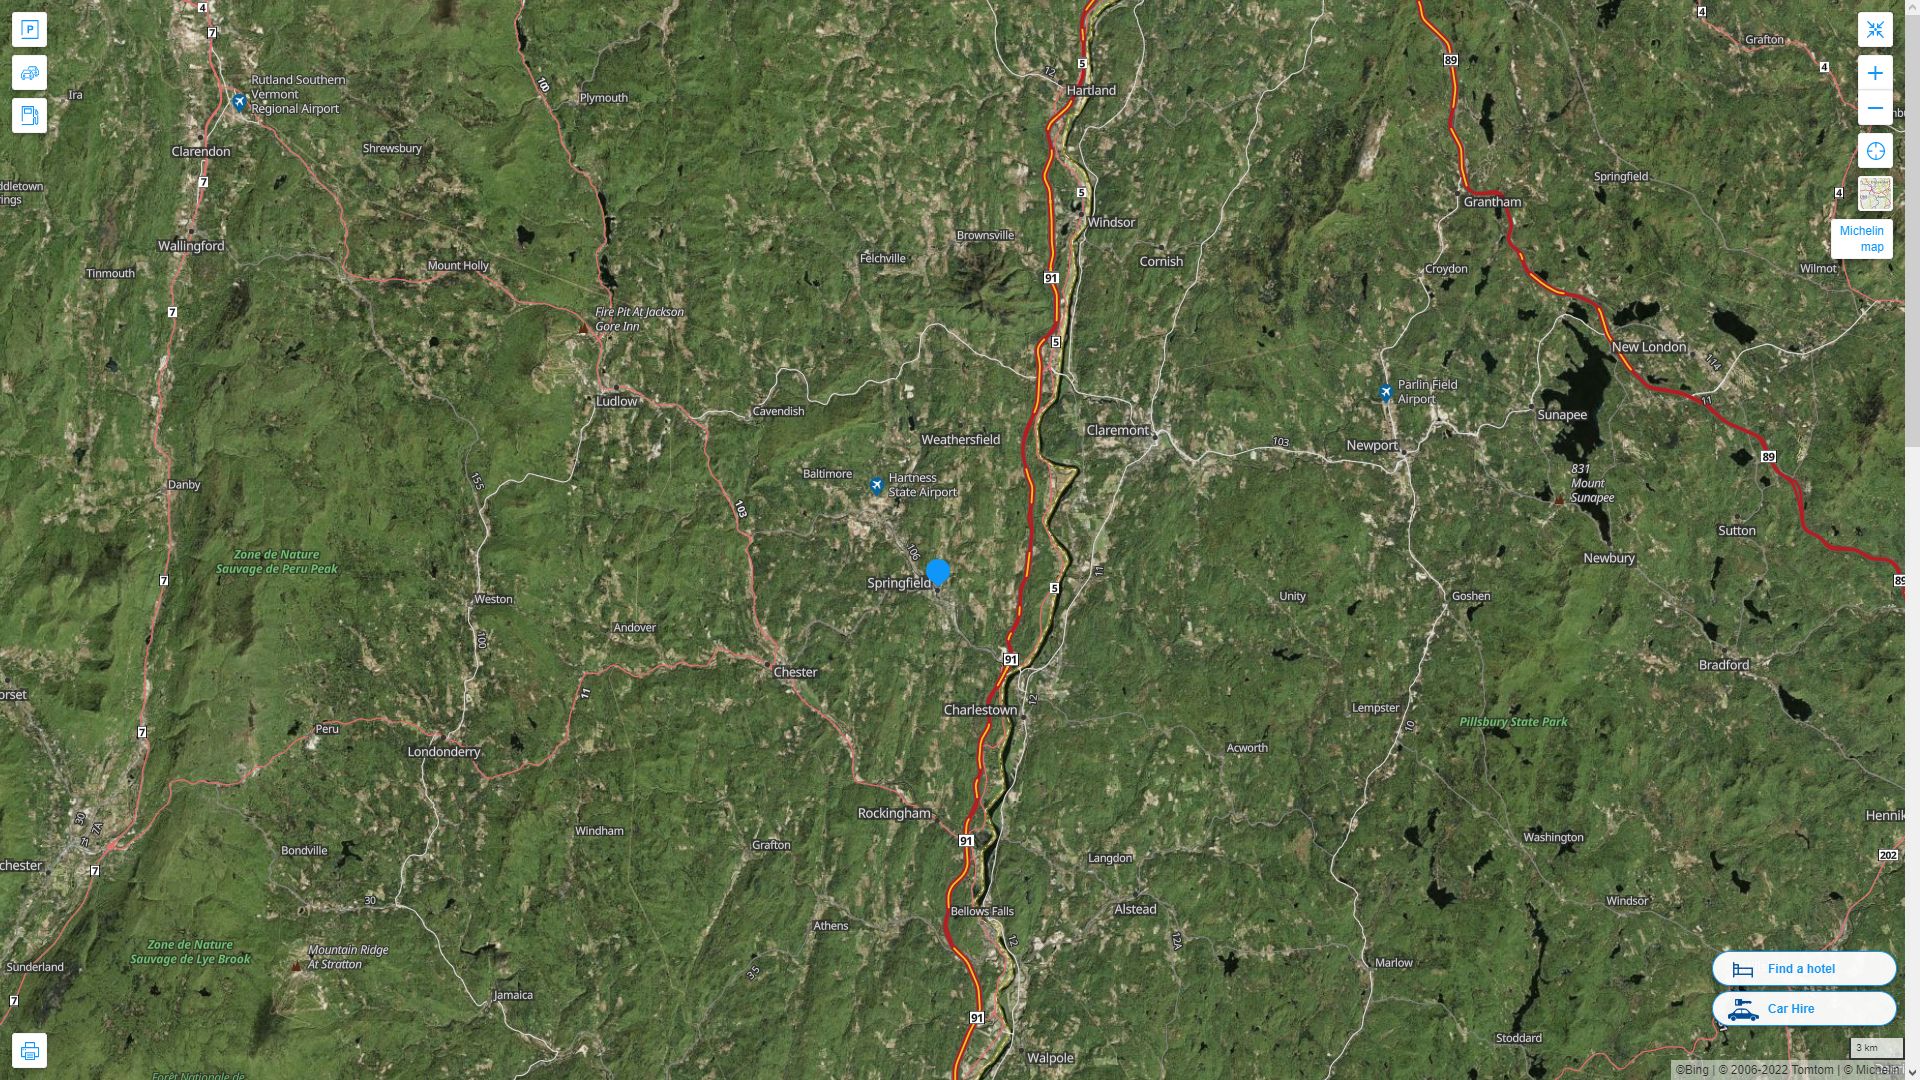 Springfield Vermont Highway and Road Map with Satellite View